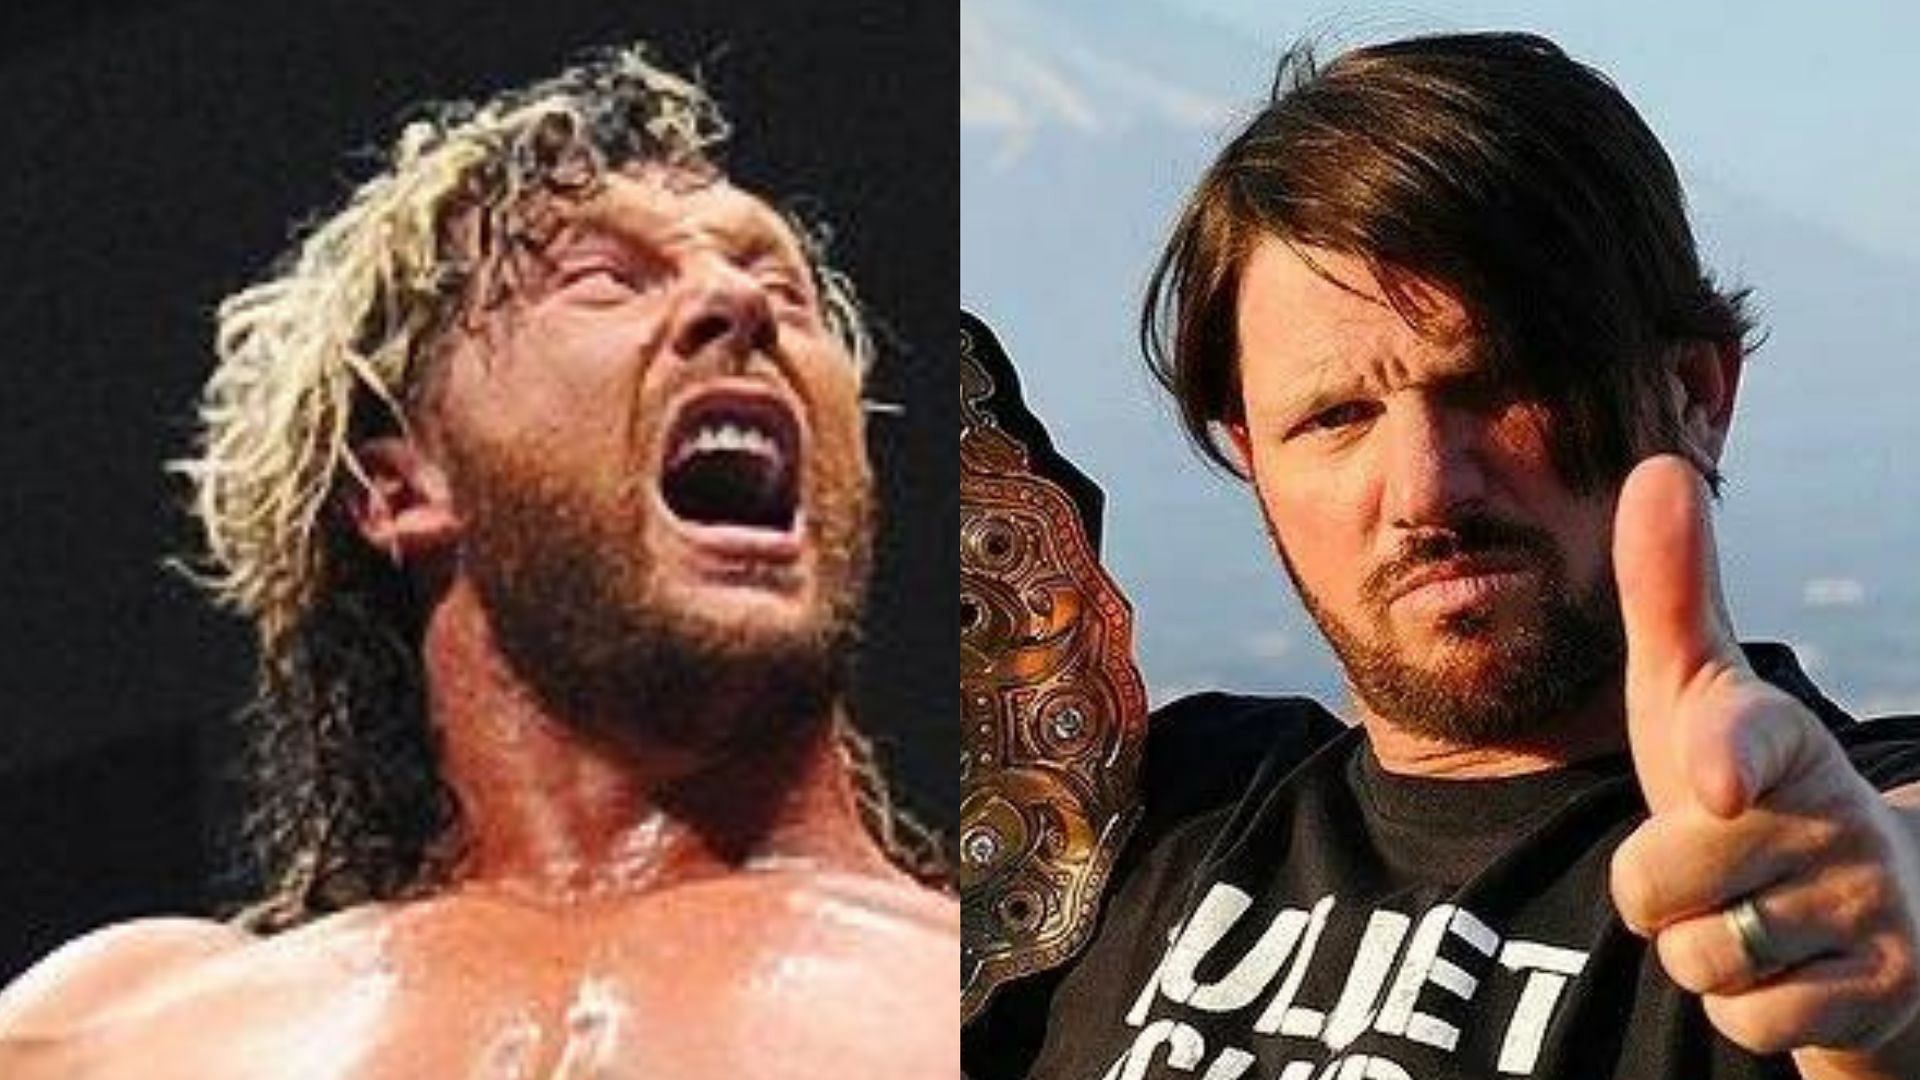 Kenny Omega has opened up an old wound regarding Bullet Club